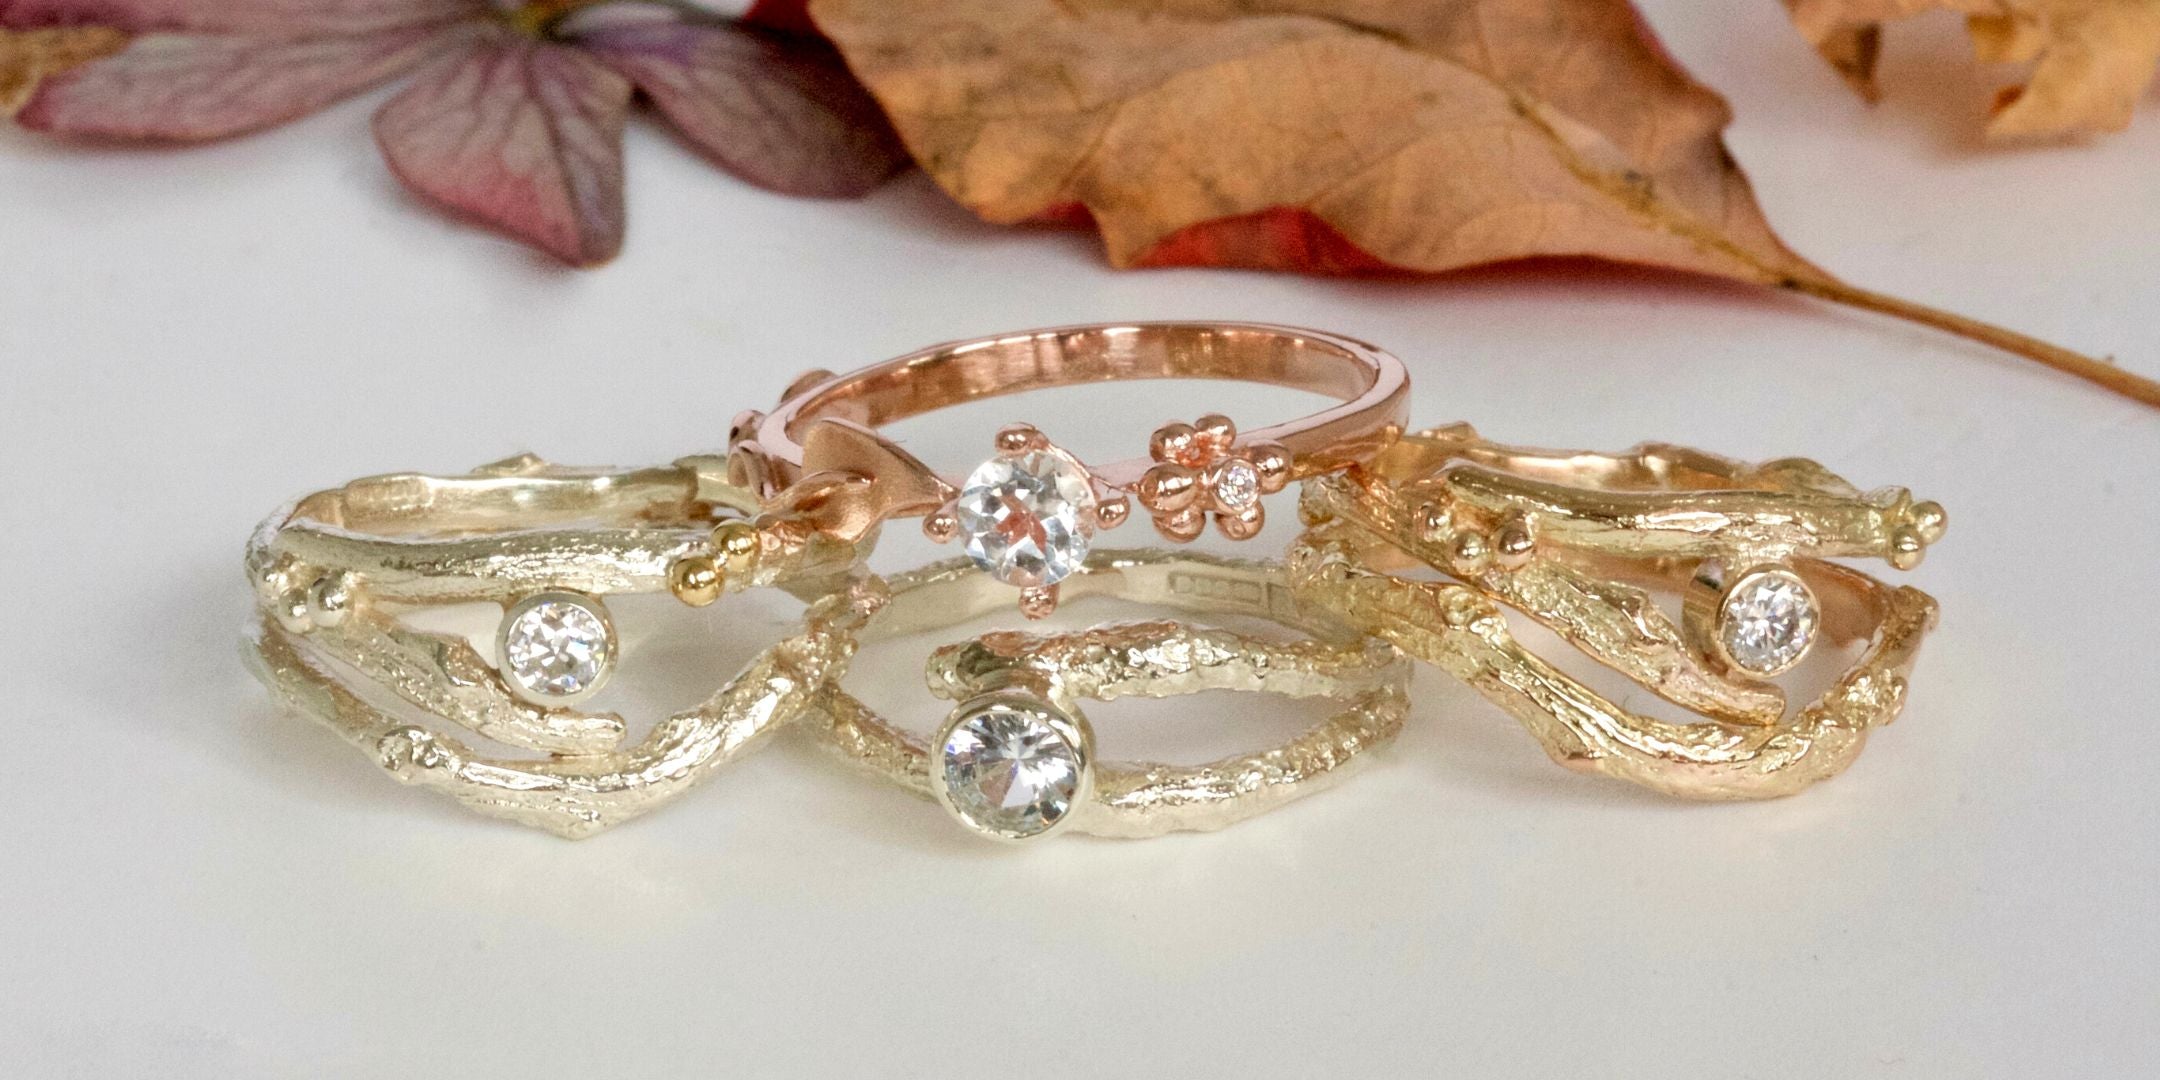 Three handmade gold rings and one rose gold ring on a white surface with autumnal leaves in the background